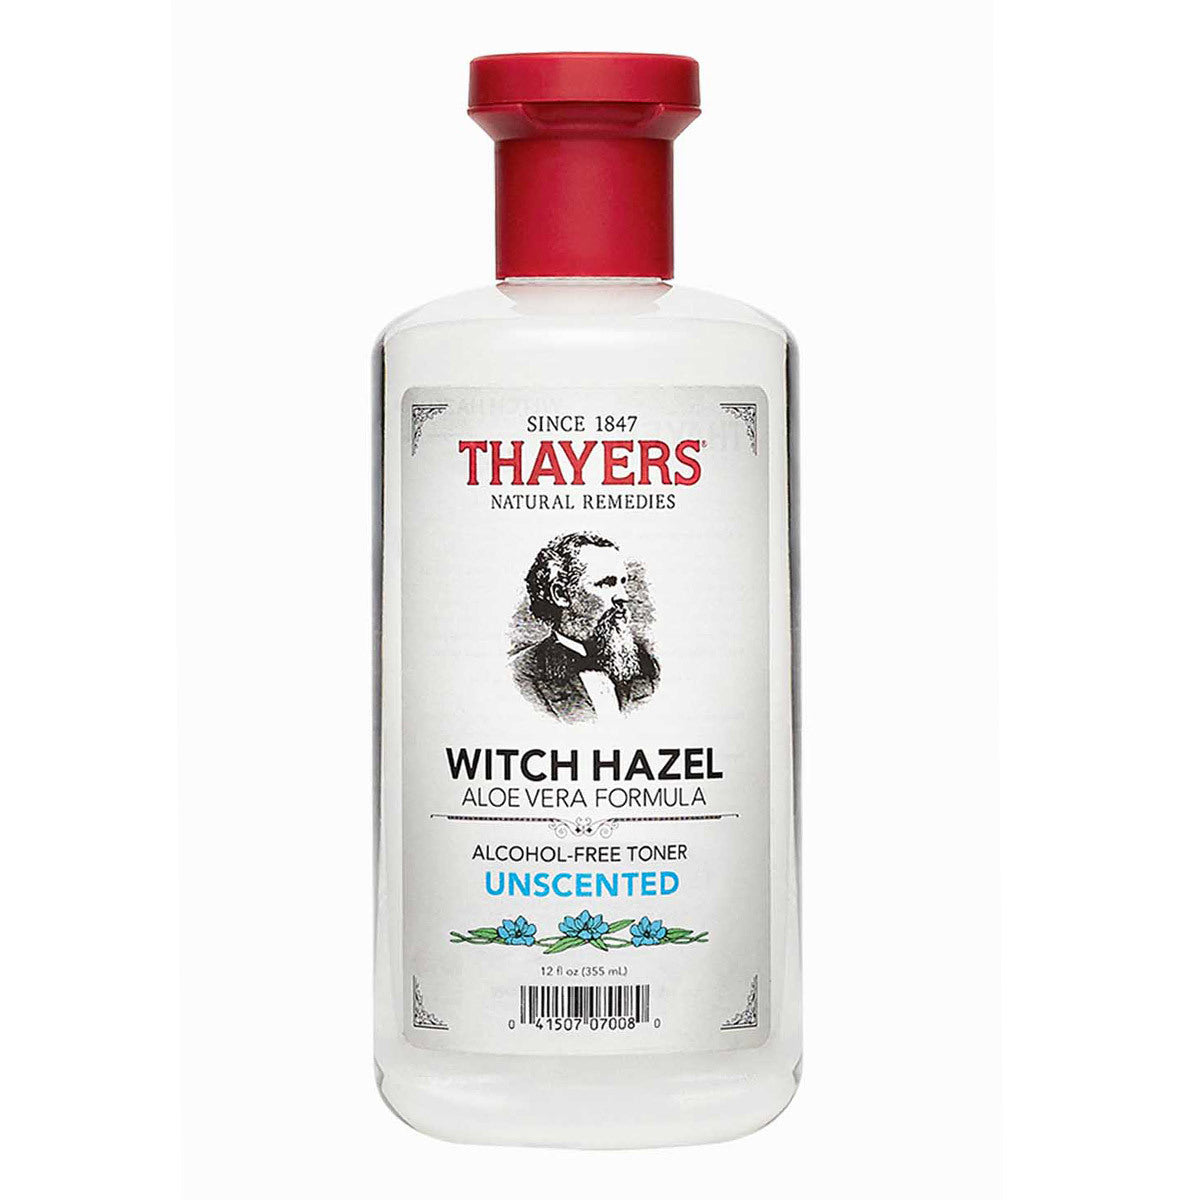 Primary image of Unscented Witch Hazel Toner Alcohol Free